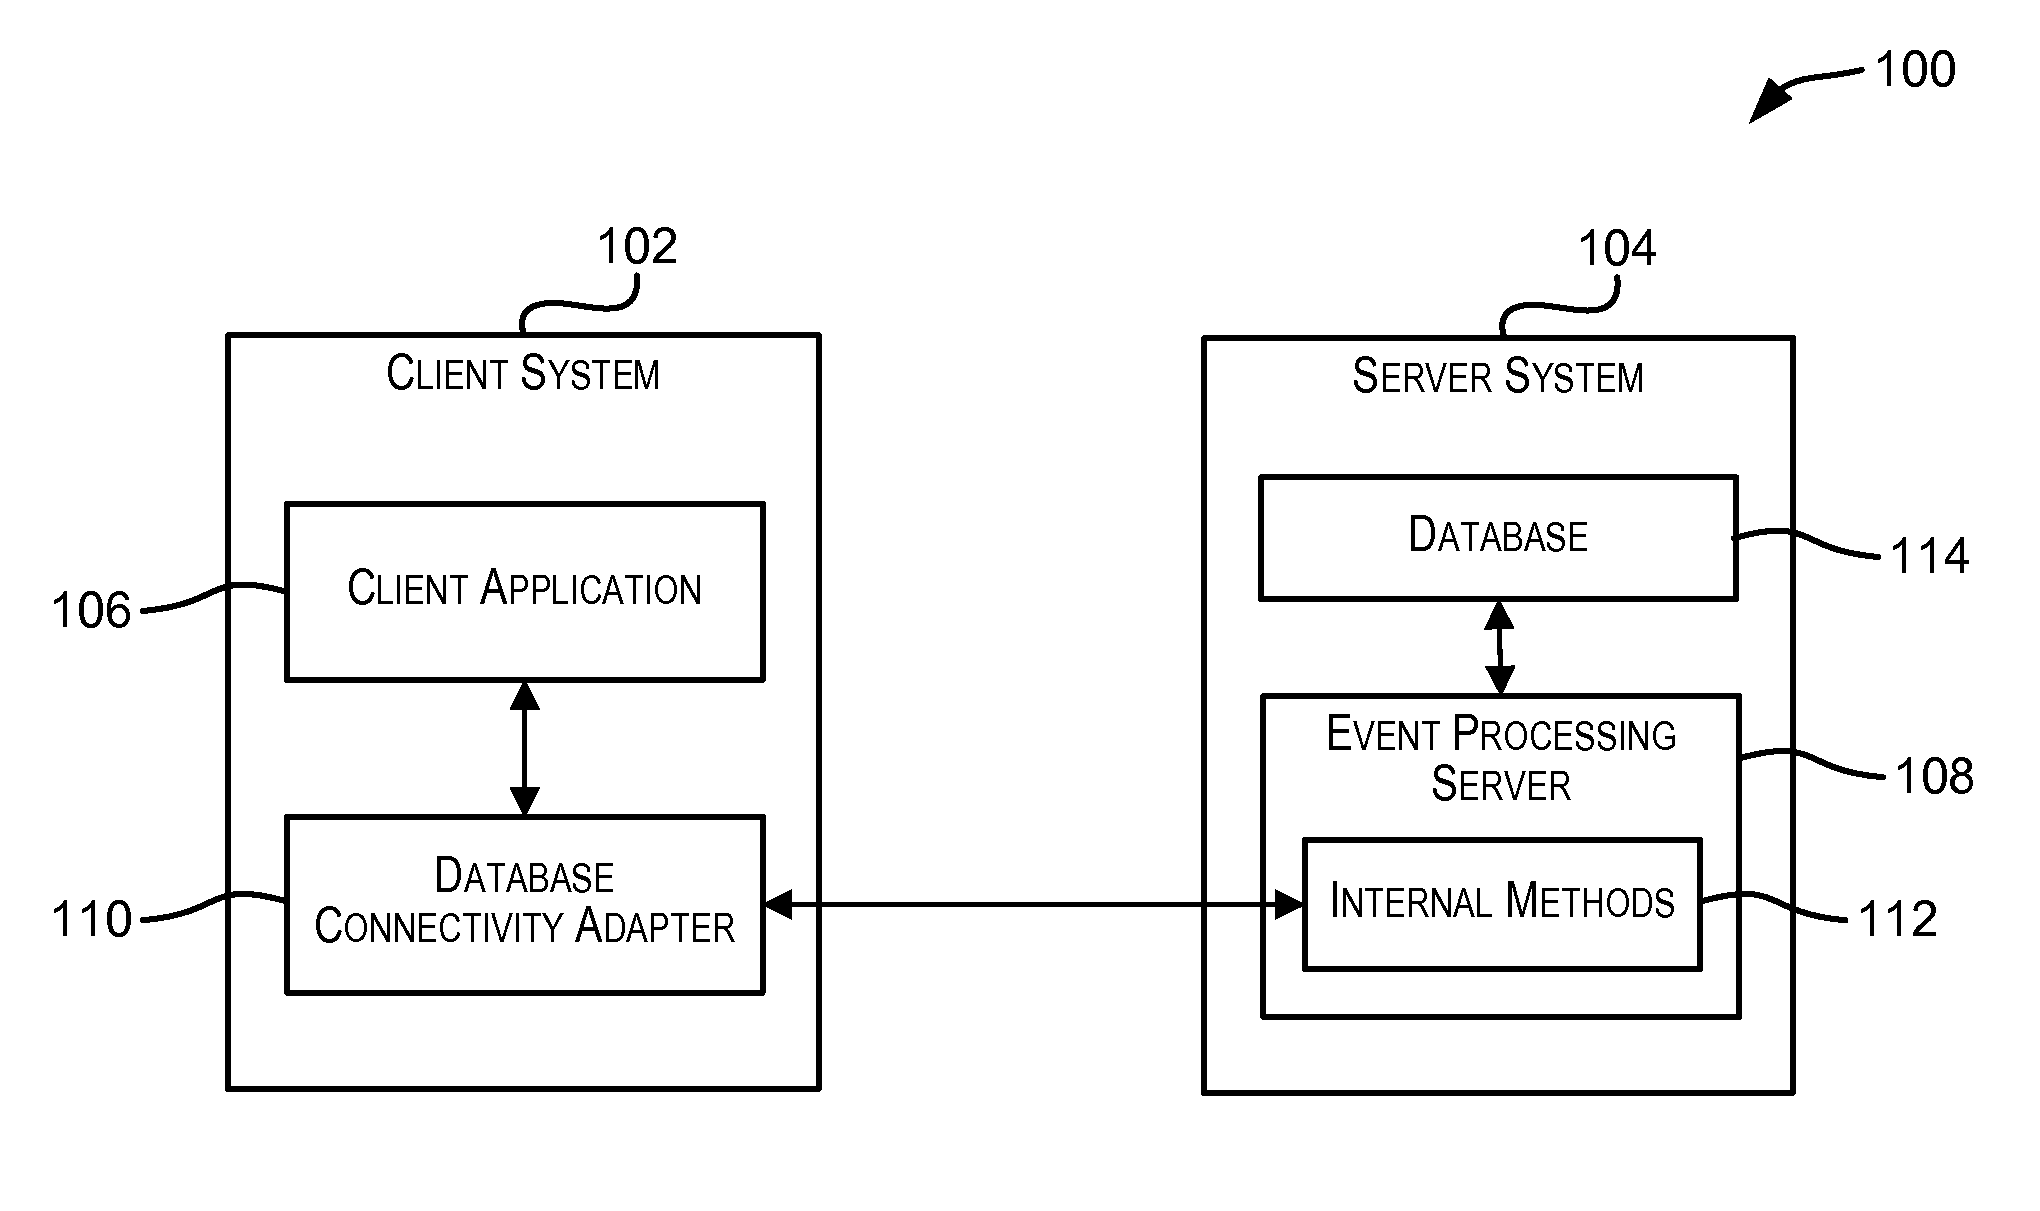 Standardized database connectivity support for an event processing server